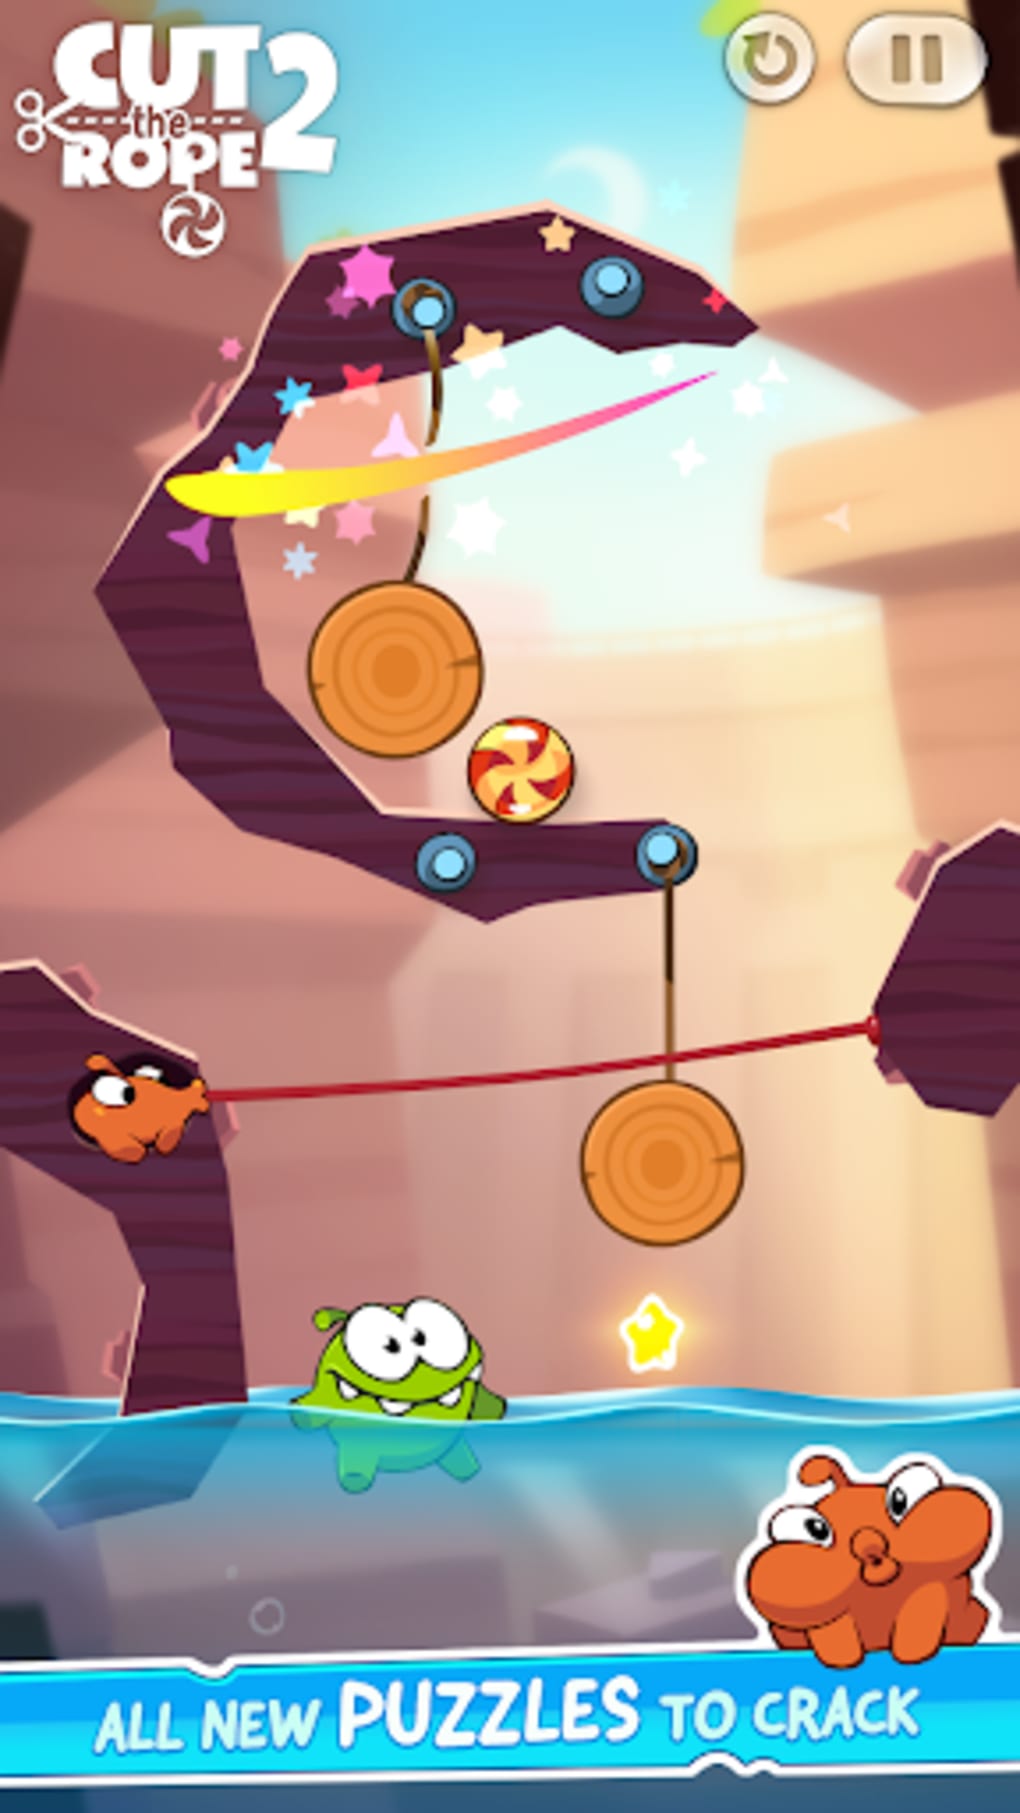 cant cut rope division 2